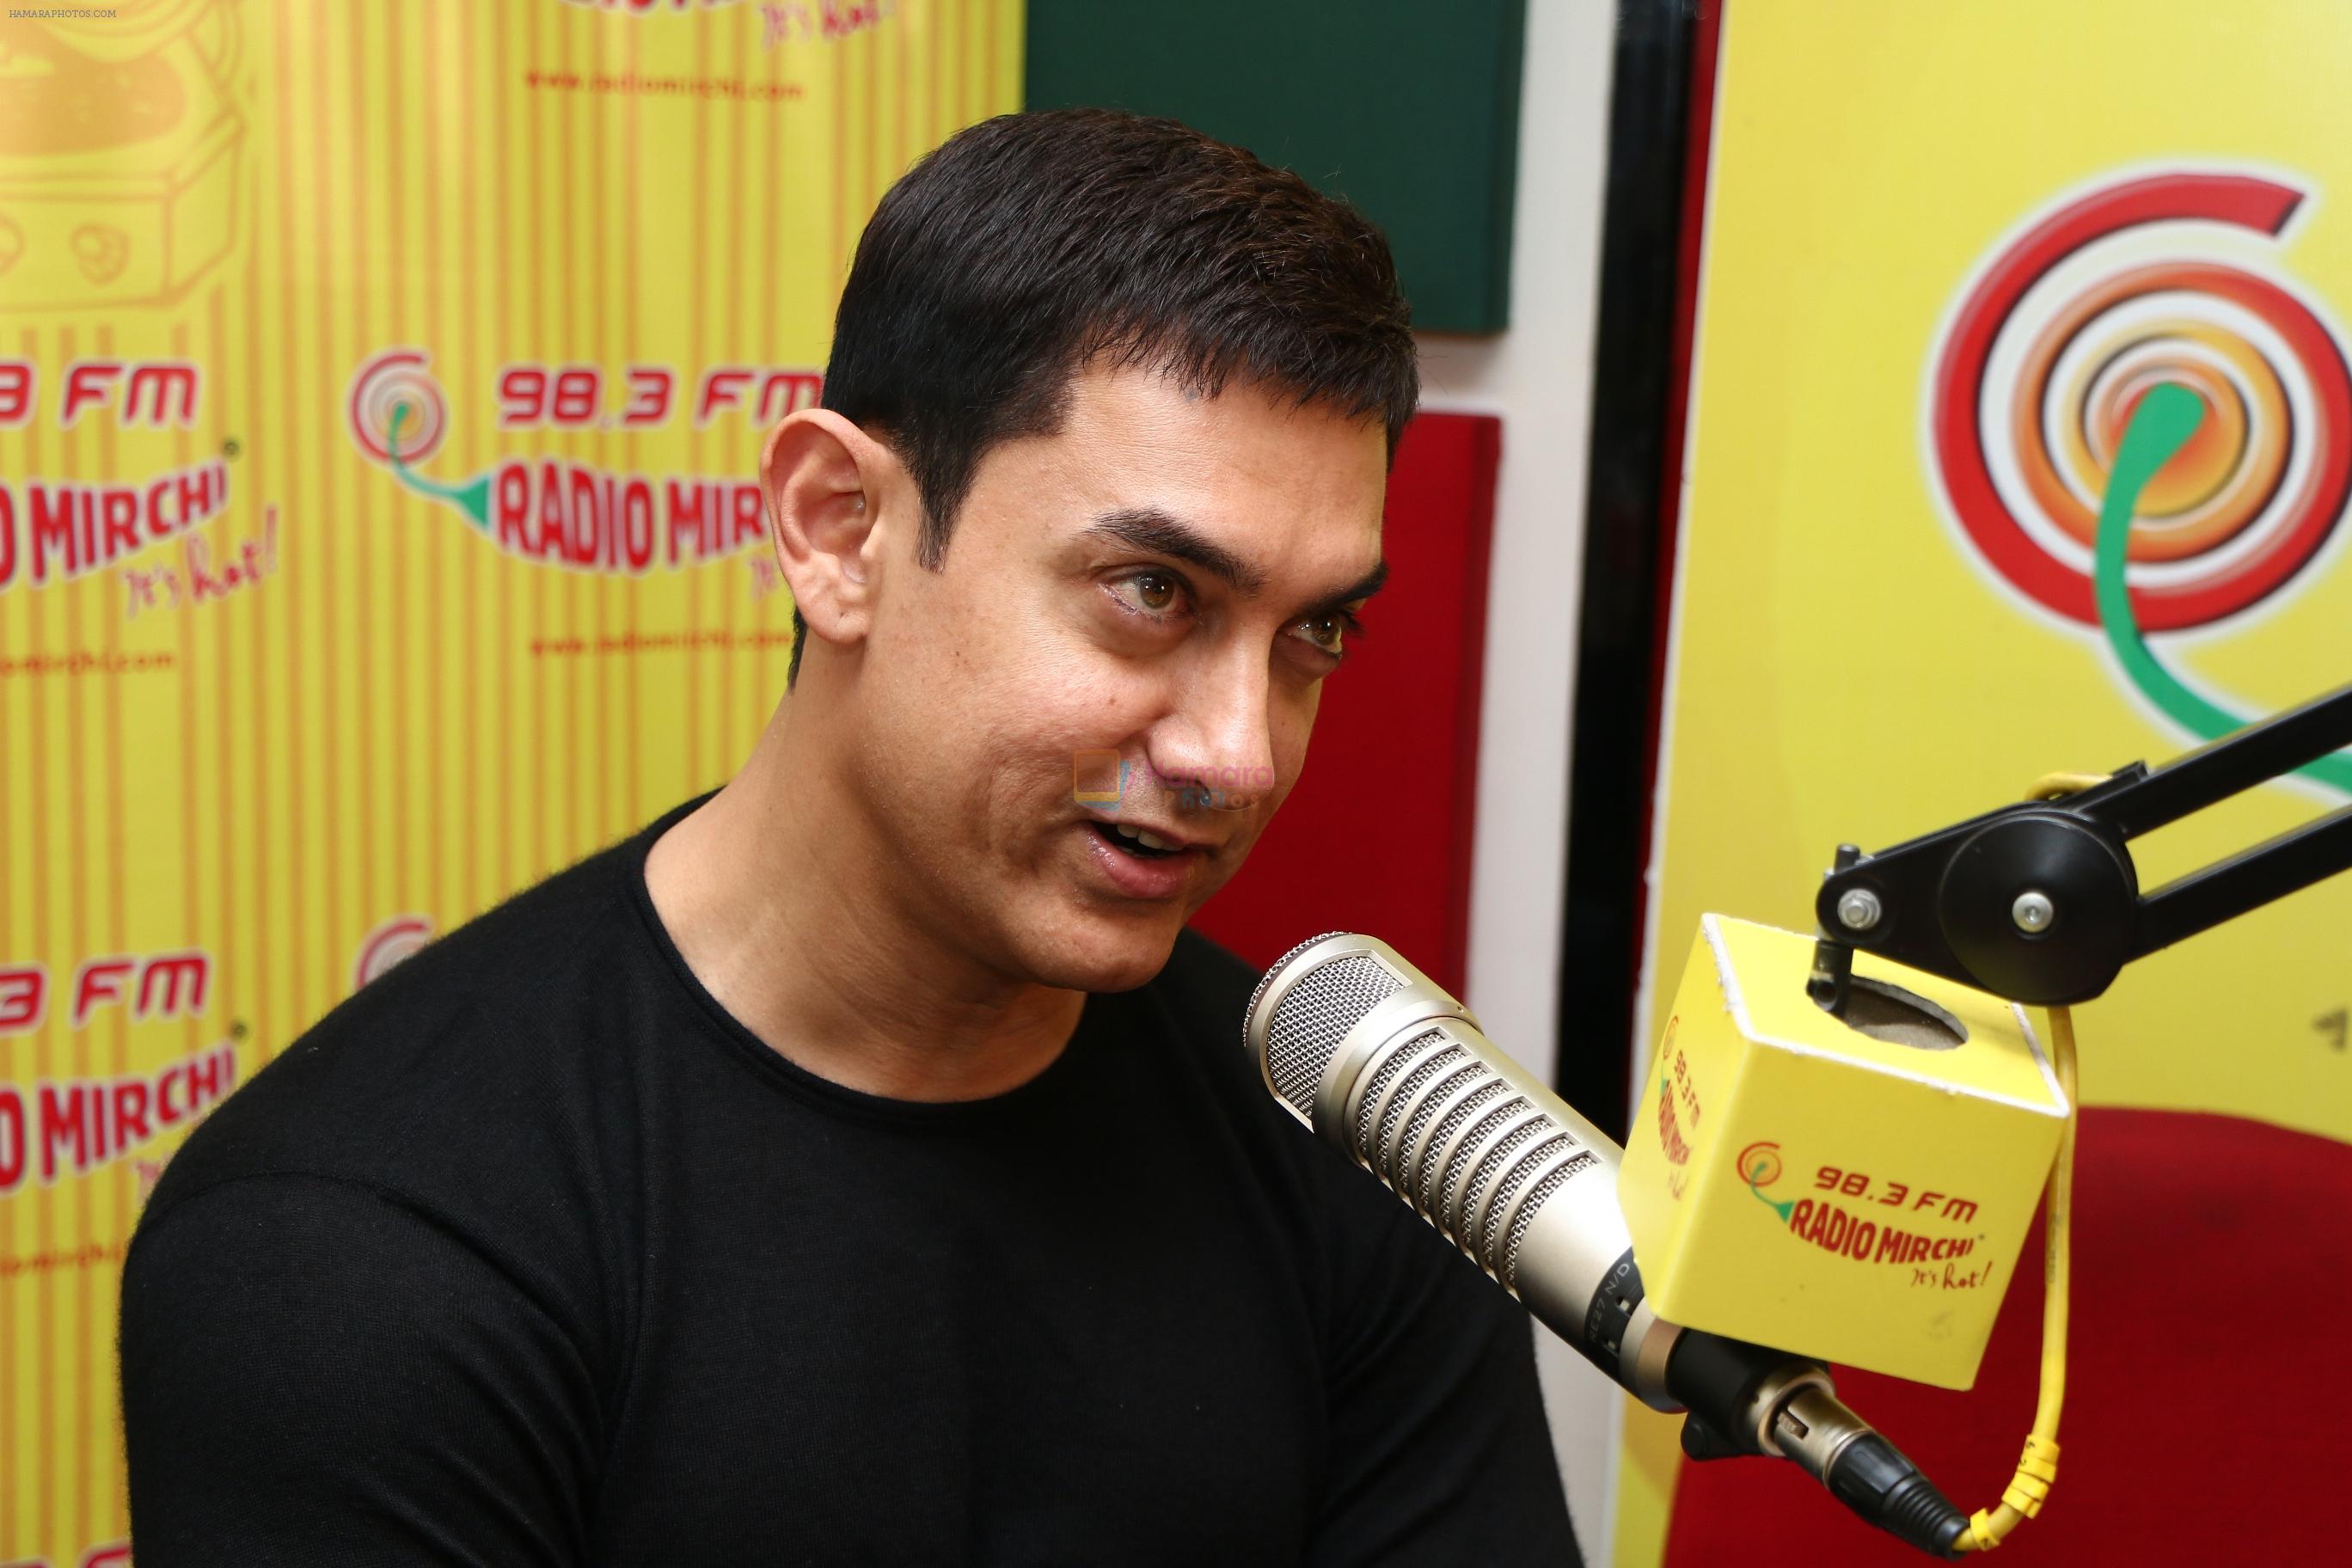 Aamir Khan at Radio Mirchi studio for promotion of his upcoming movie Dhoom 3